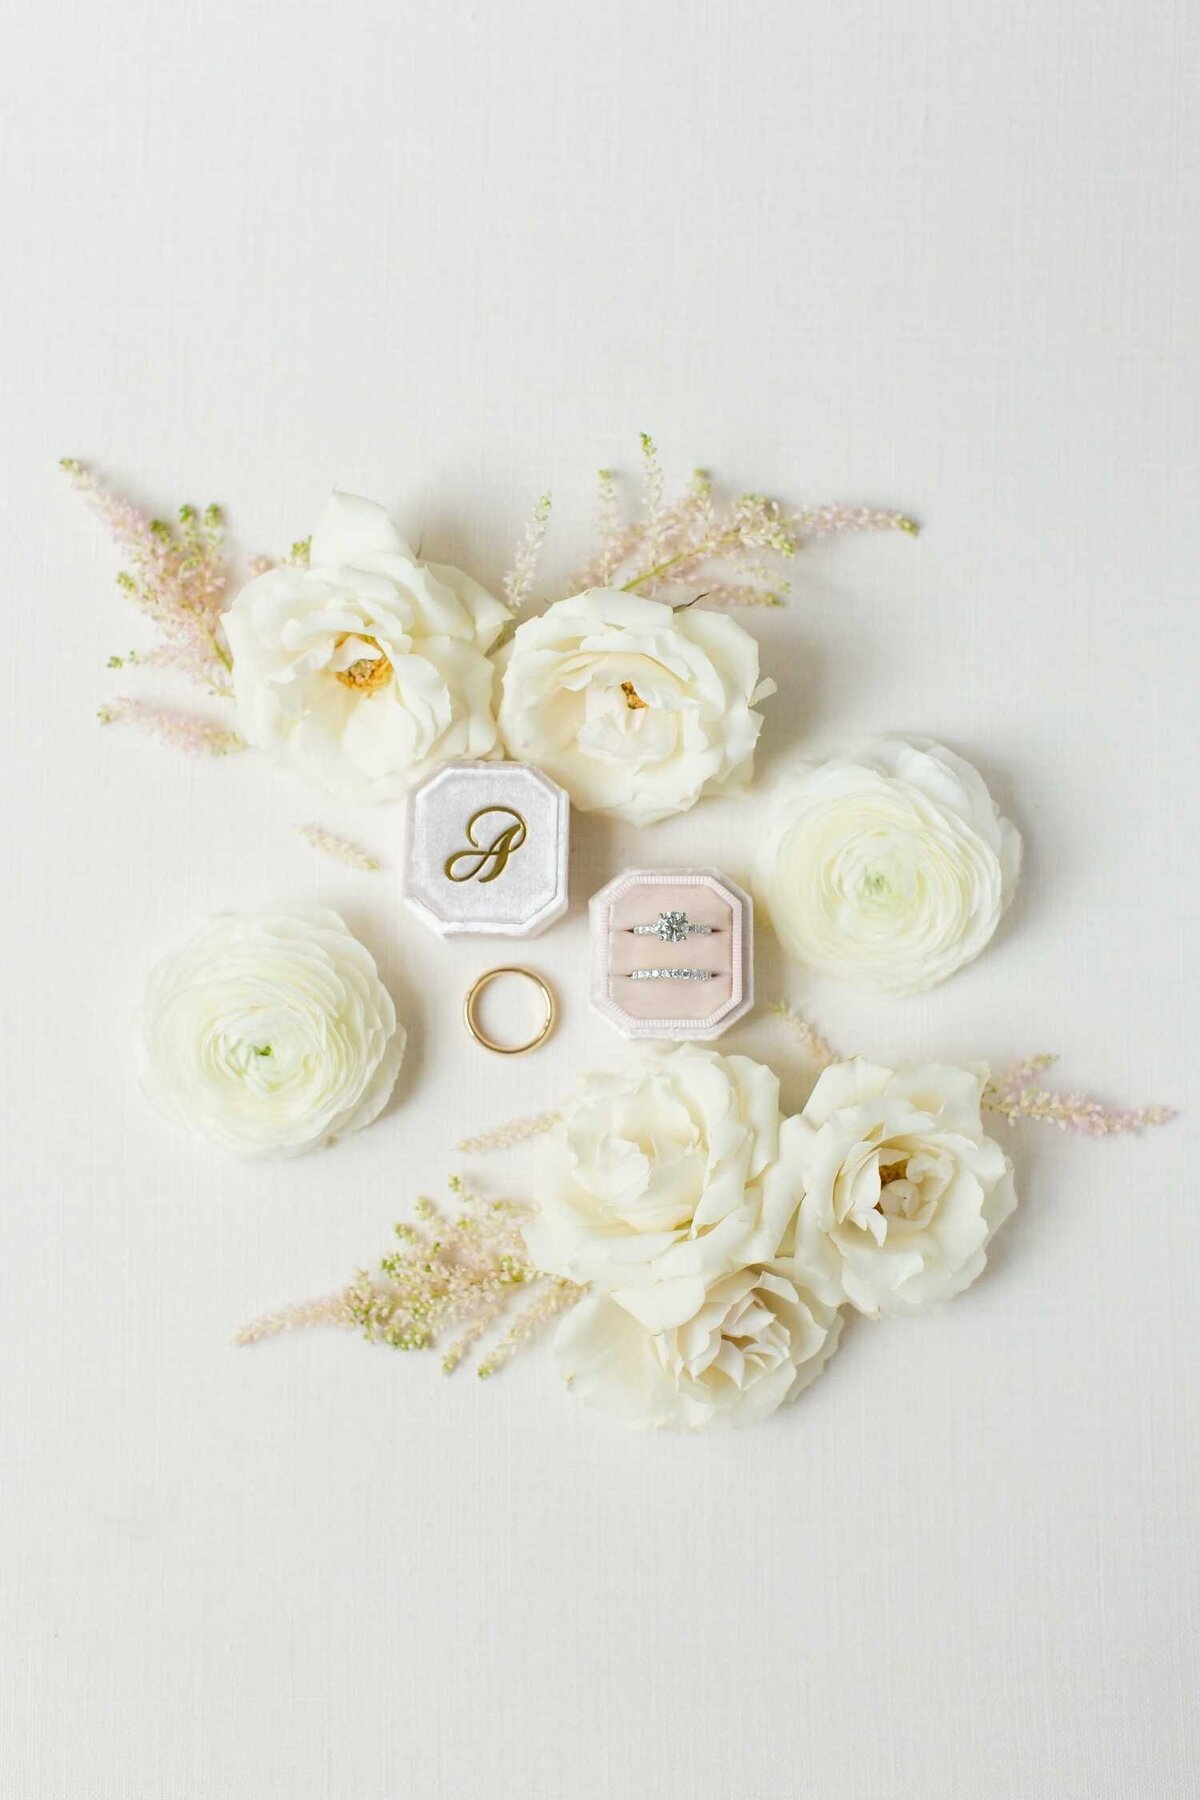 Velvet Engagement Ring Boxes Style with White Flowers for a flatlay at Luxury Chicago Outdoor Historic Wedding Venue